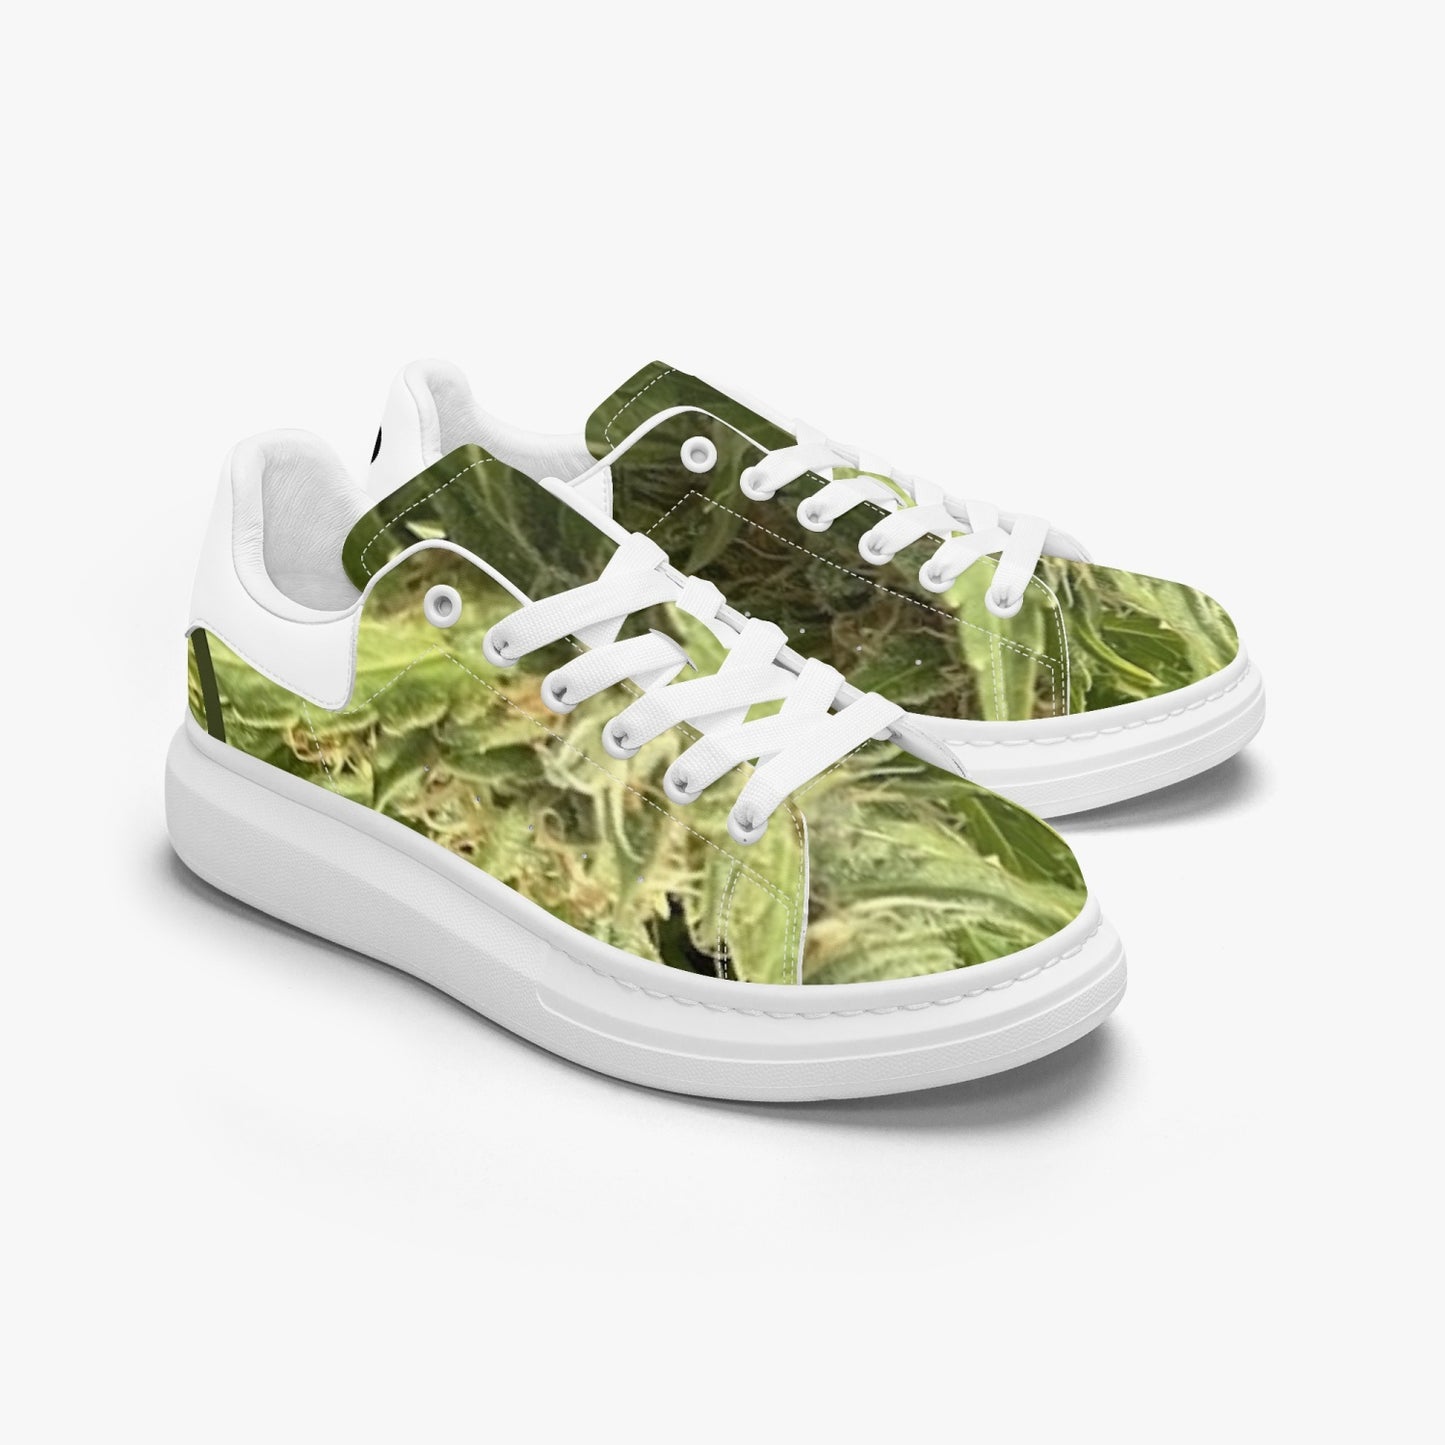 FZ Unisex Weed Leather Oversized Sneakers